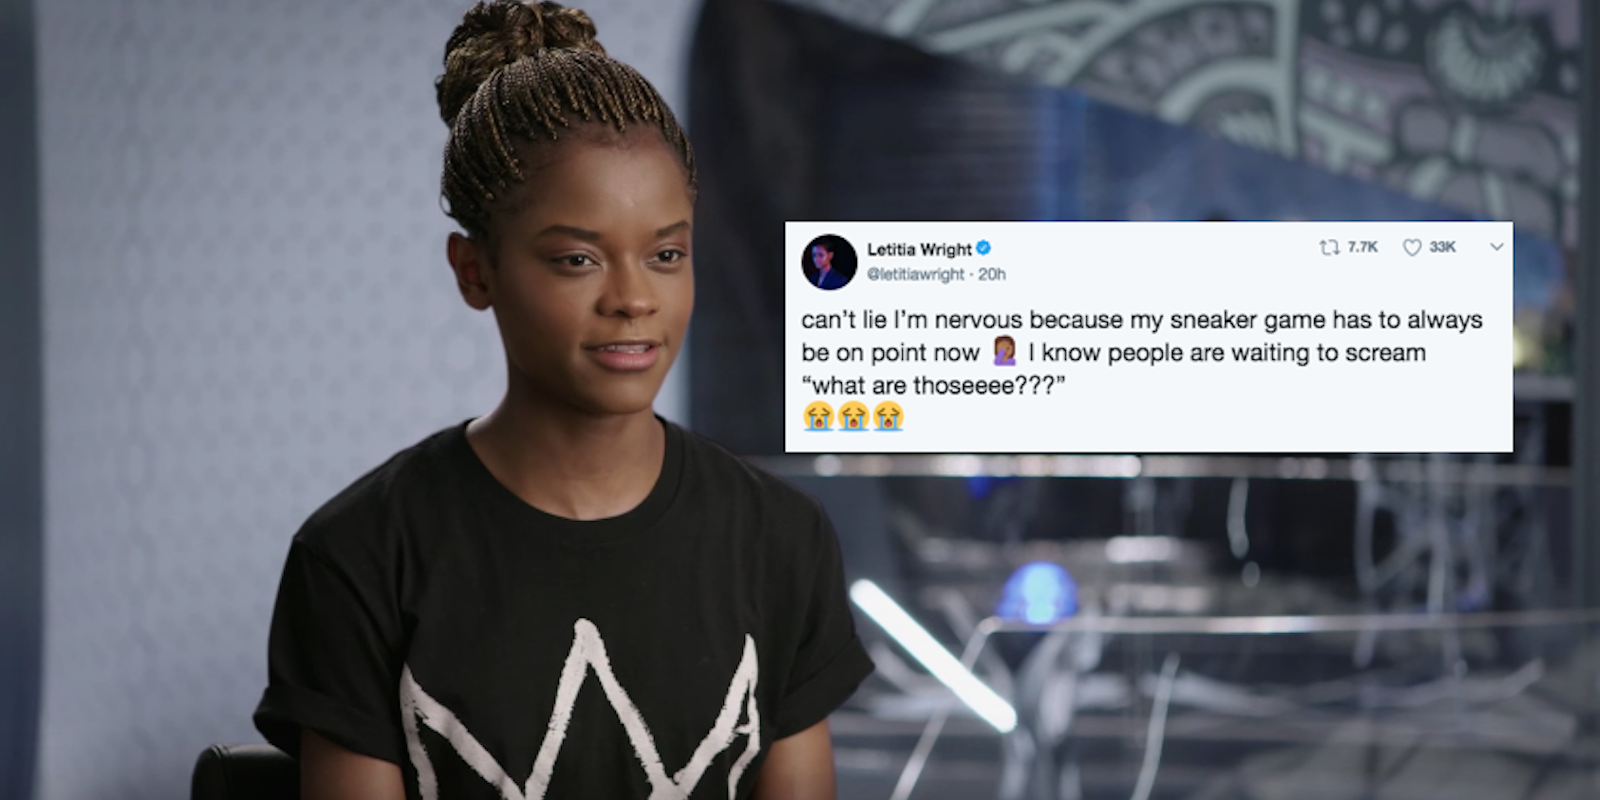 Letitia Wright sits in a black teeshirt with her hair in a bun